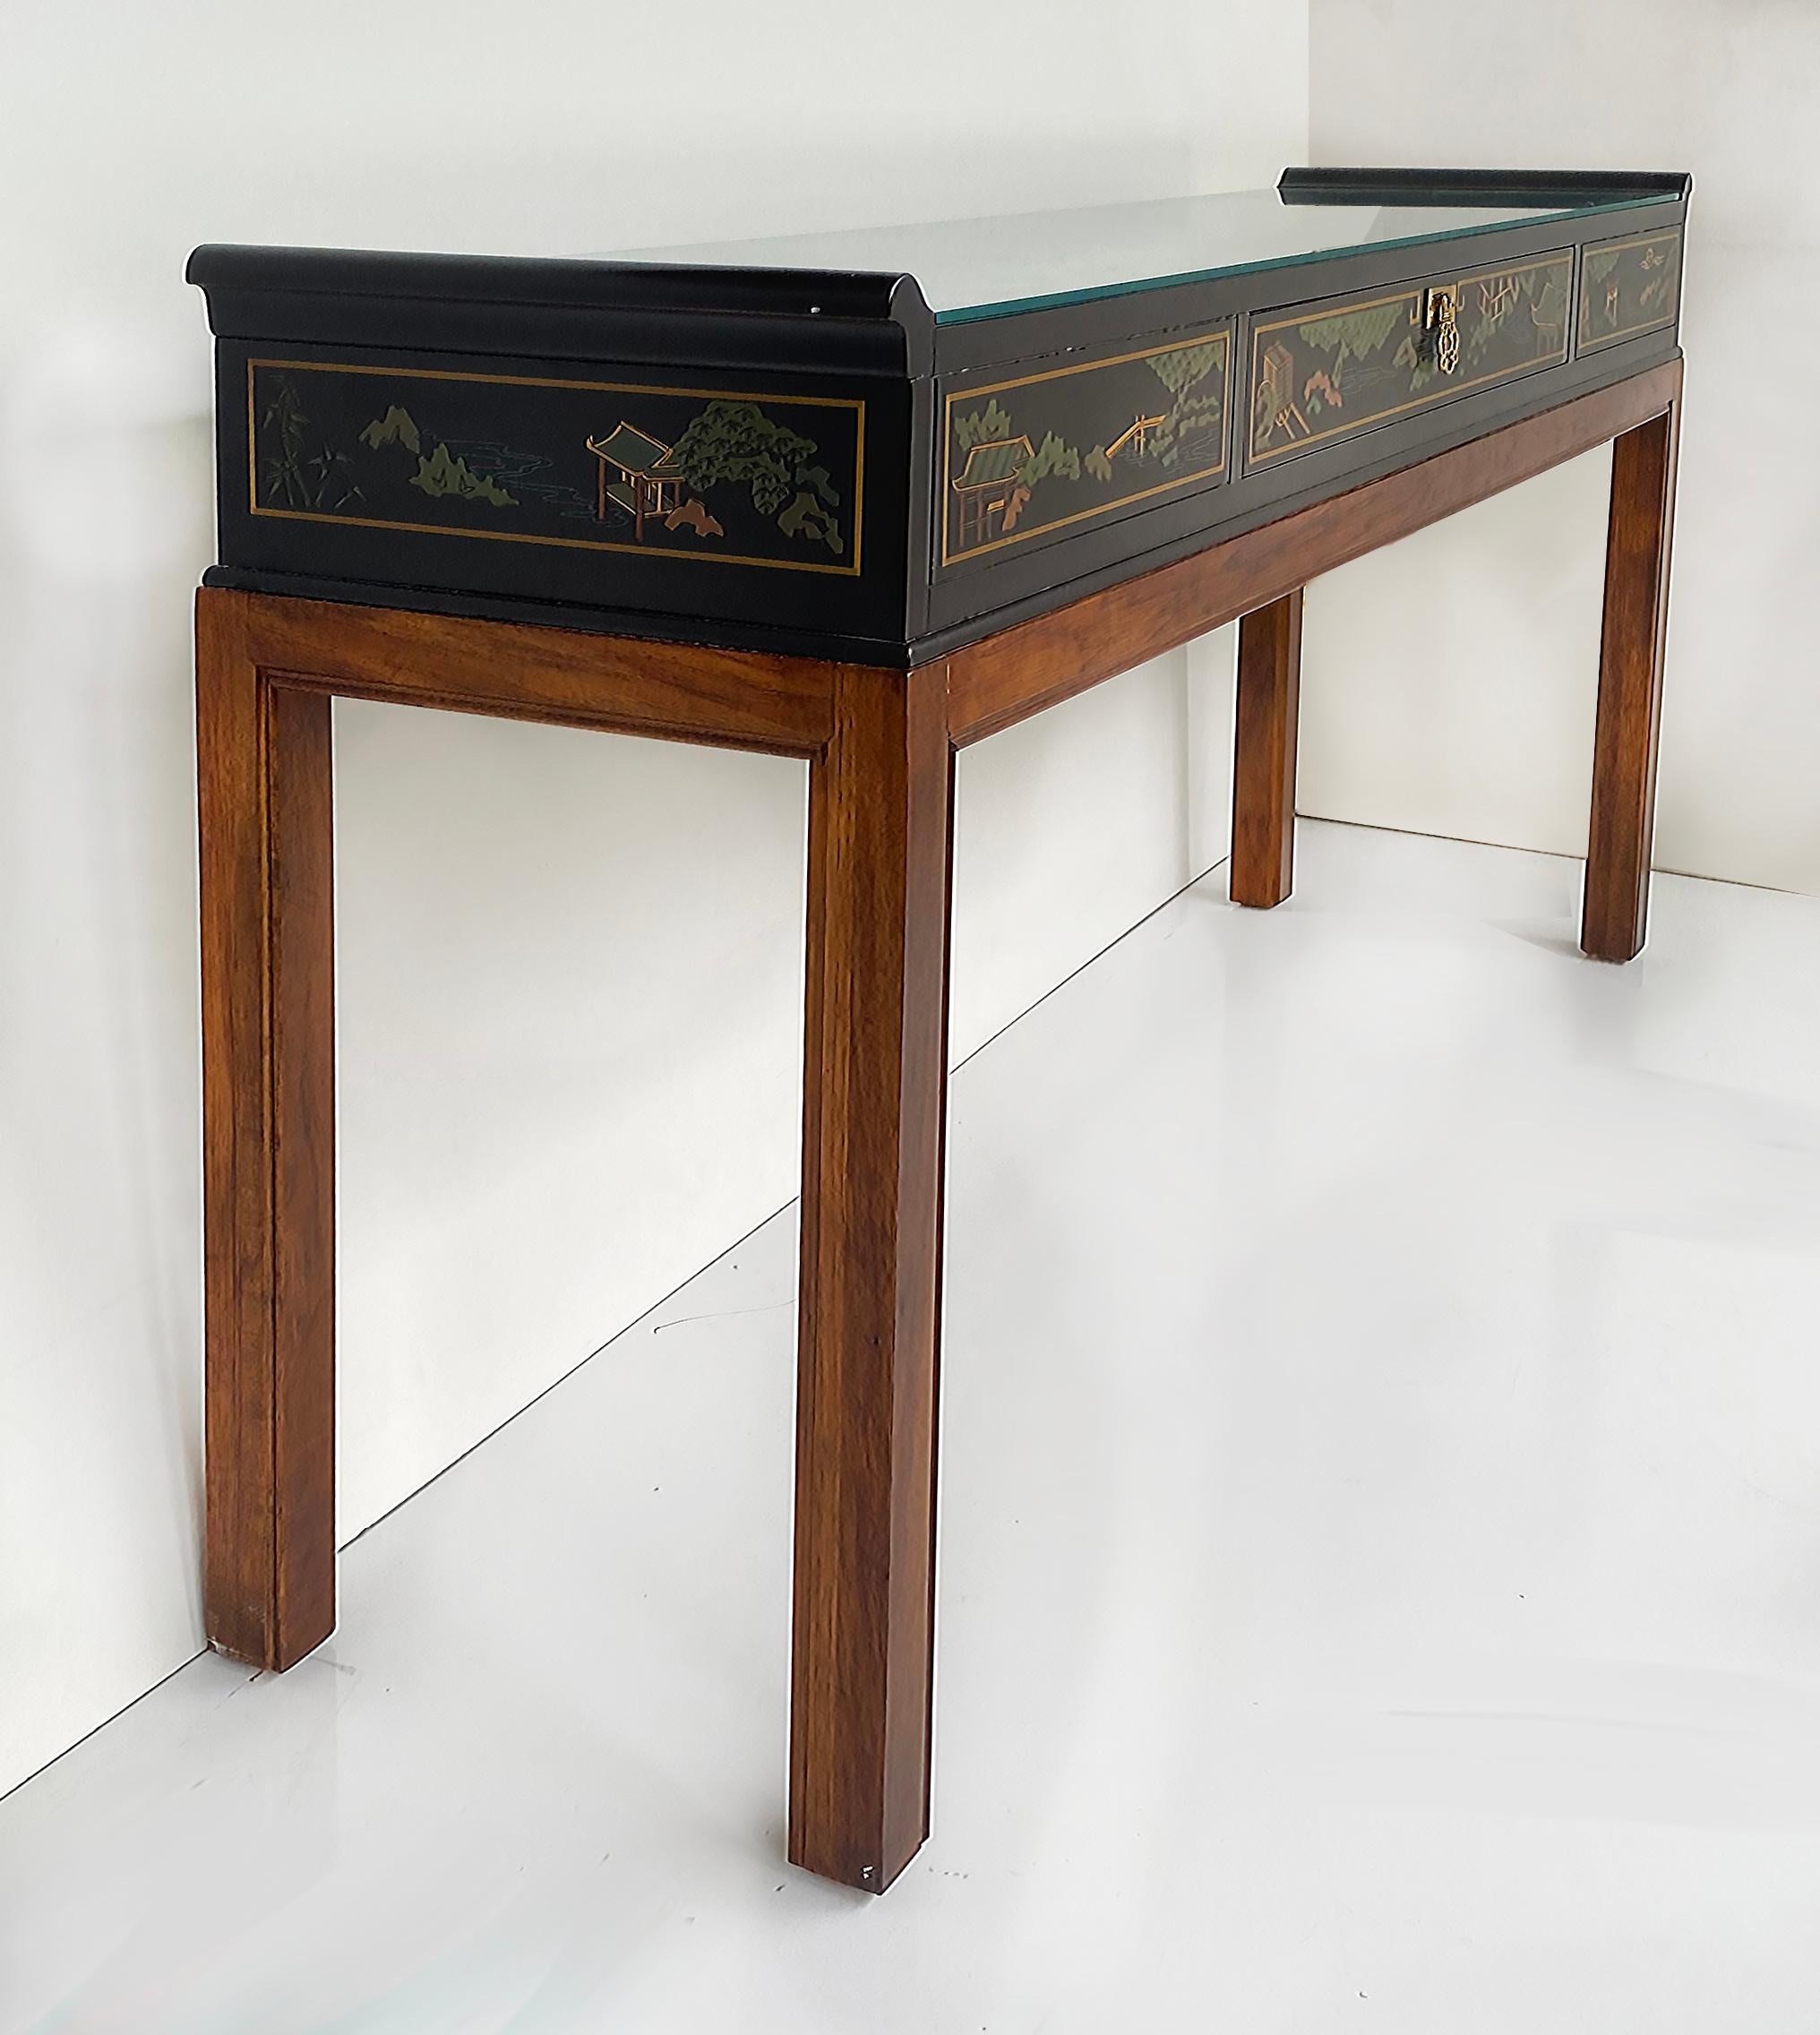 Drexel Heritage Chinoiserie Console Table, Drawer and Glass Top

Offered for sale is a Drexel Heritage console table with black lacquered painted Chinoiserie details.  The top portion appears as a slender chest that is on a brown wood base with